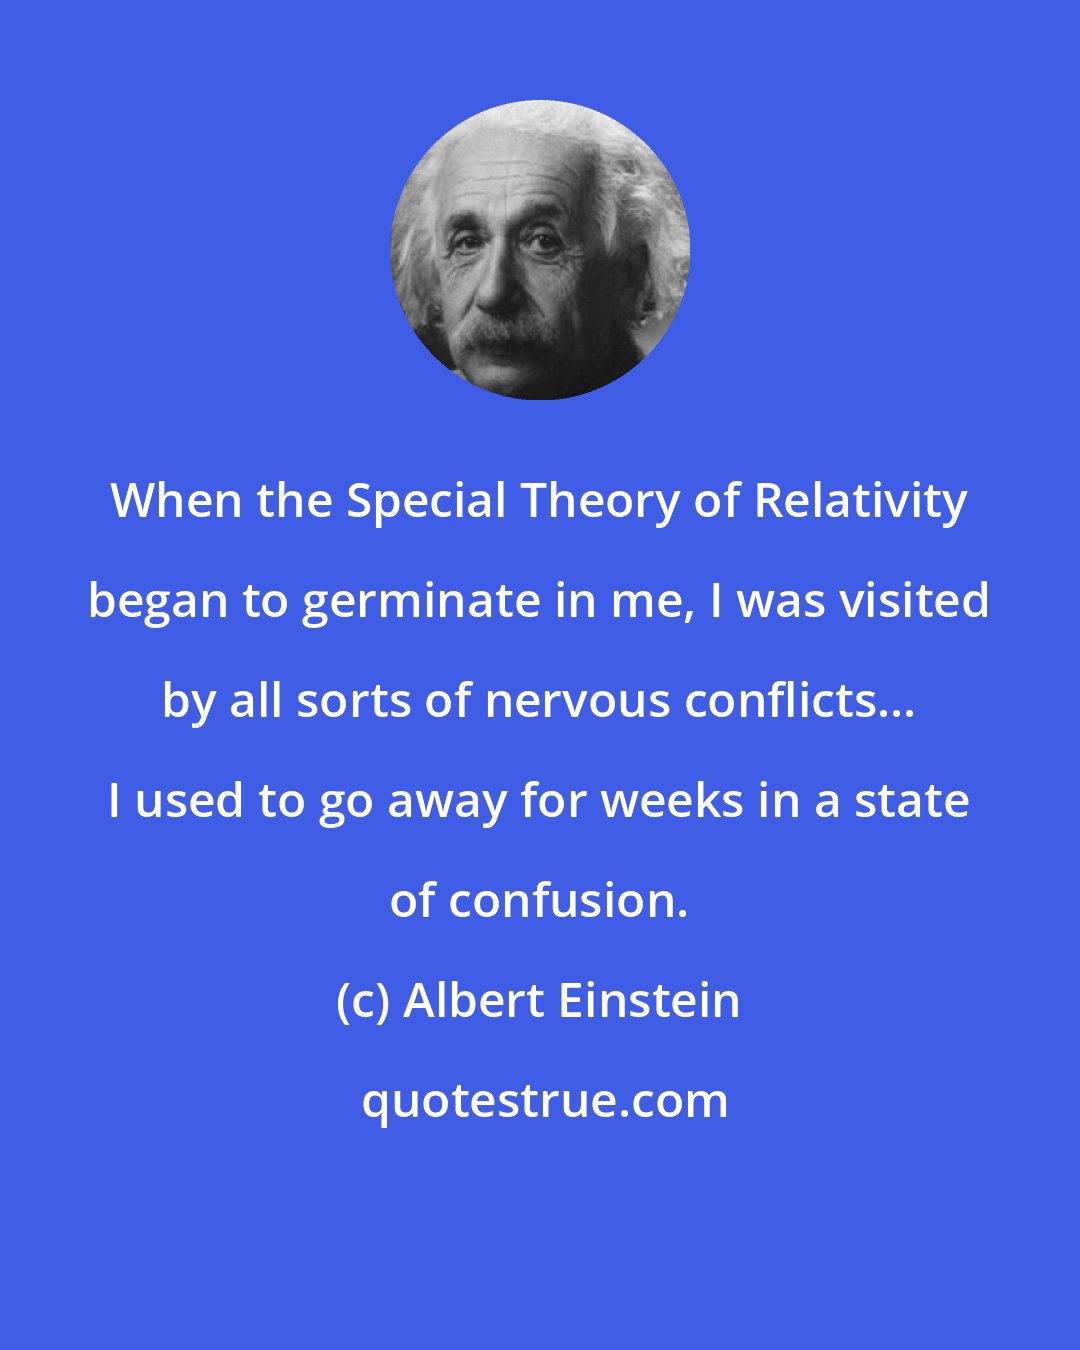 Albert Einstein: When the Special Theory of Relativity began to germinate in me, I was visited by all sorts of nervous conflicts... I used to go away for weeks in a state of confusion.